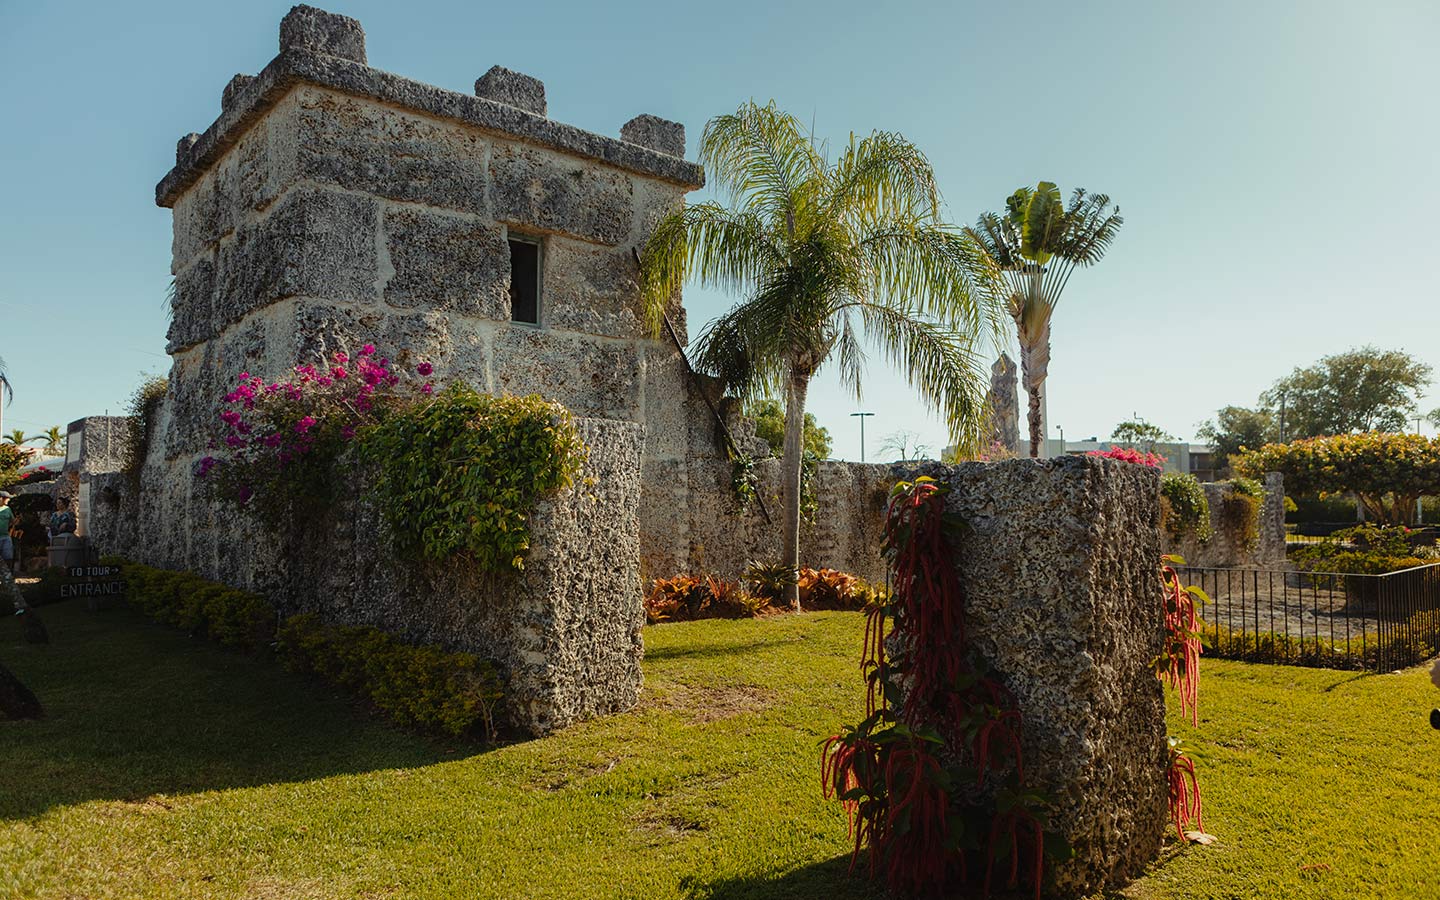 Coral Castle tower made completely out of coral rock with blue sky and palm trees